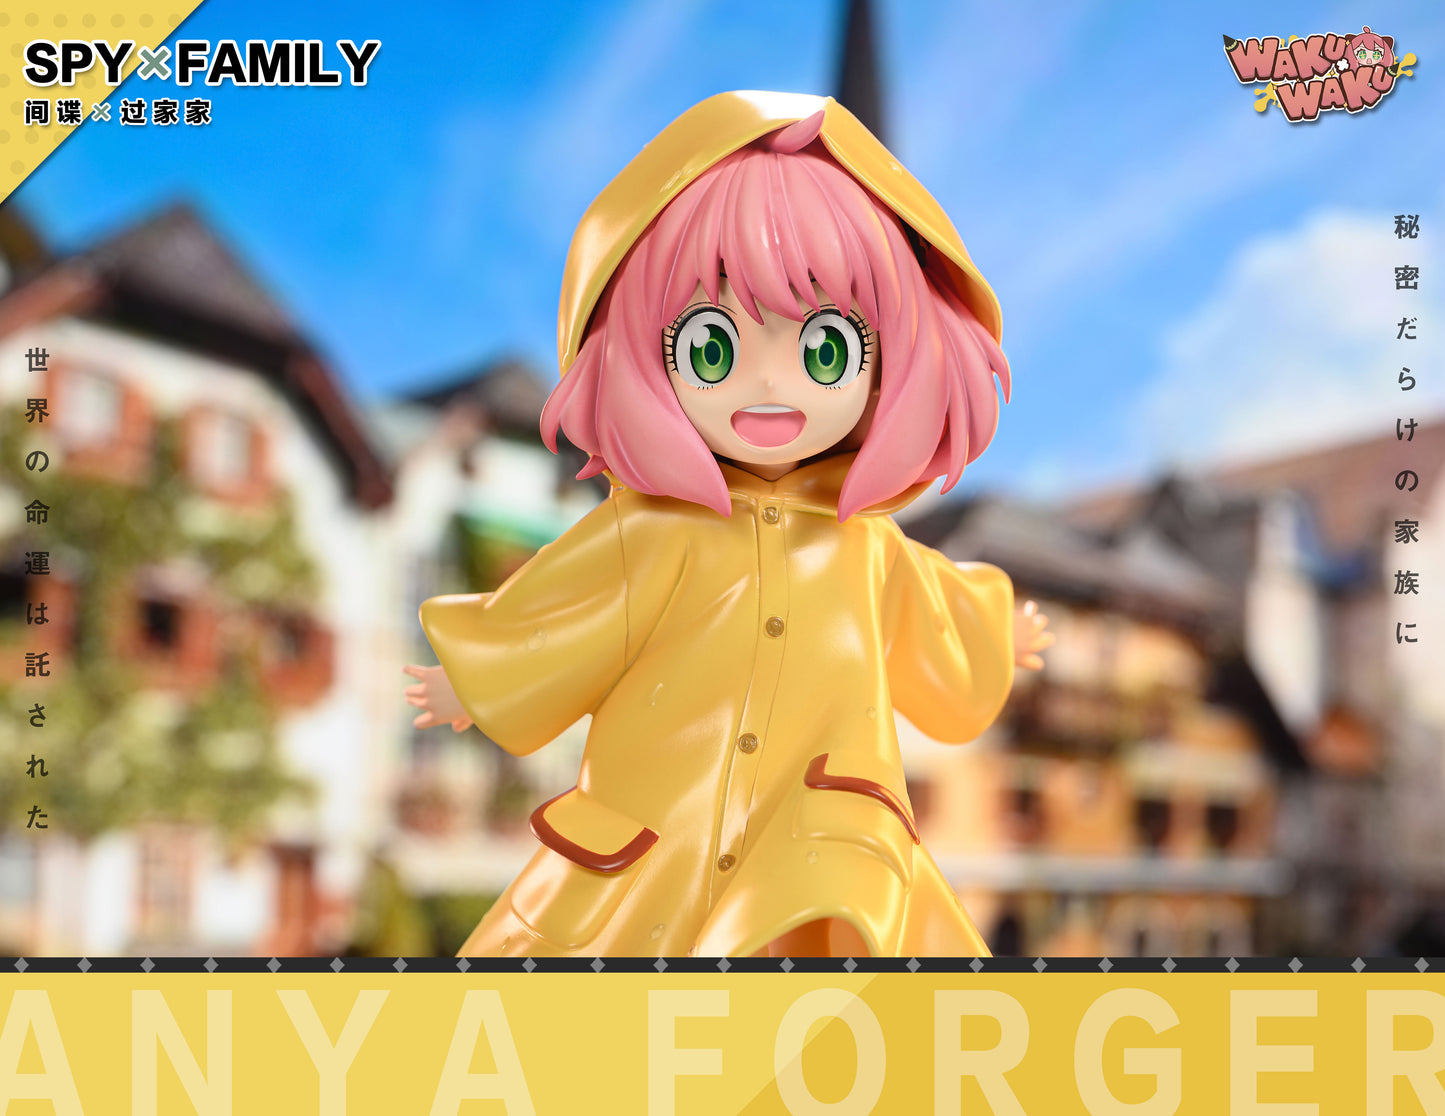 WAKUWAKU STUDIO – SPY x FAMILY: CONQUEST SERIES 1. WATER KICKING ANYA [SOLD OUT]